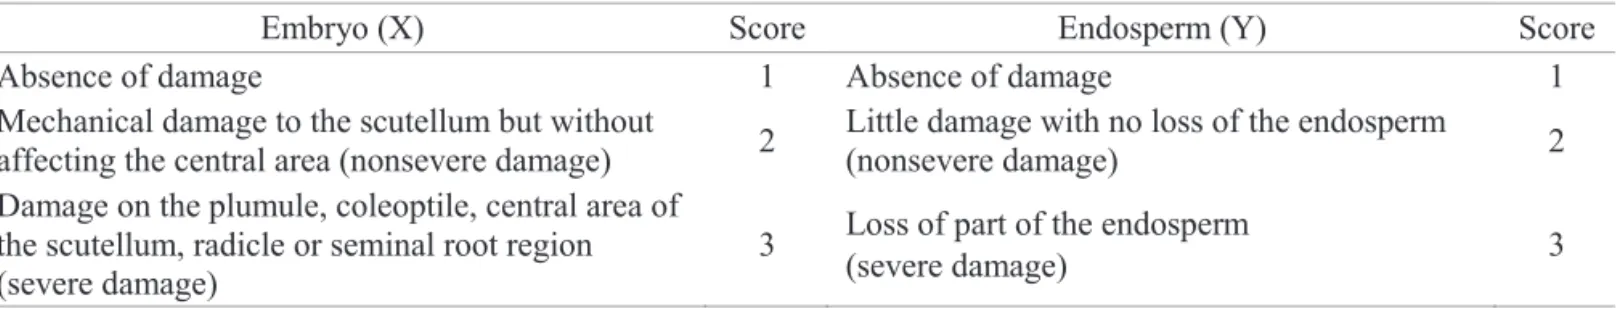 Table 1. Criteria for scoring (X.Y) mechanical damage in the embryo and endosperm of sweet corn seeds evaluated by the  X-Ray test.